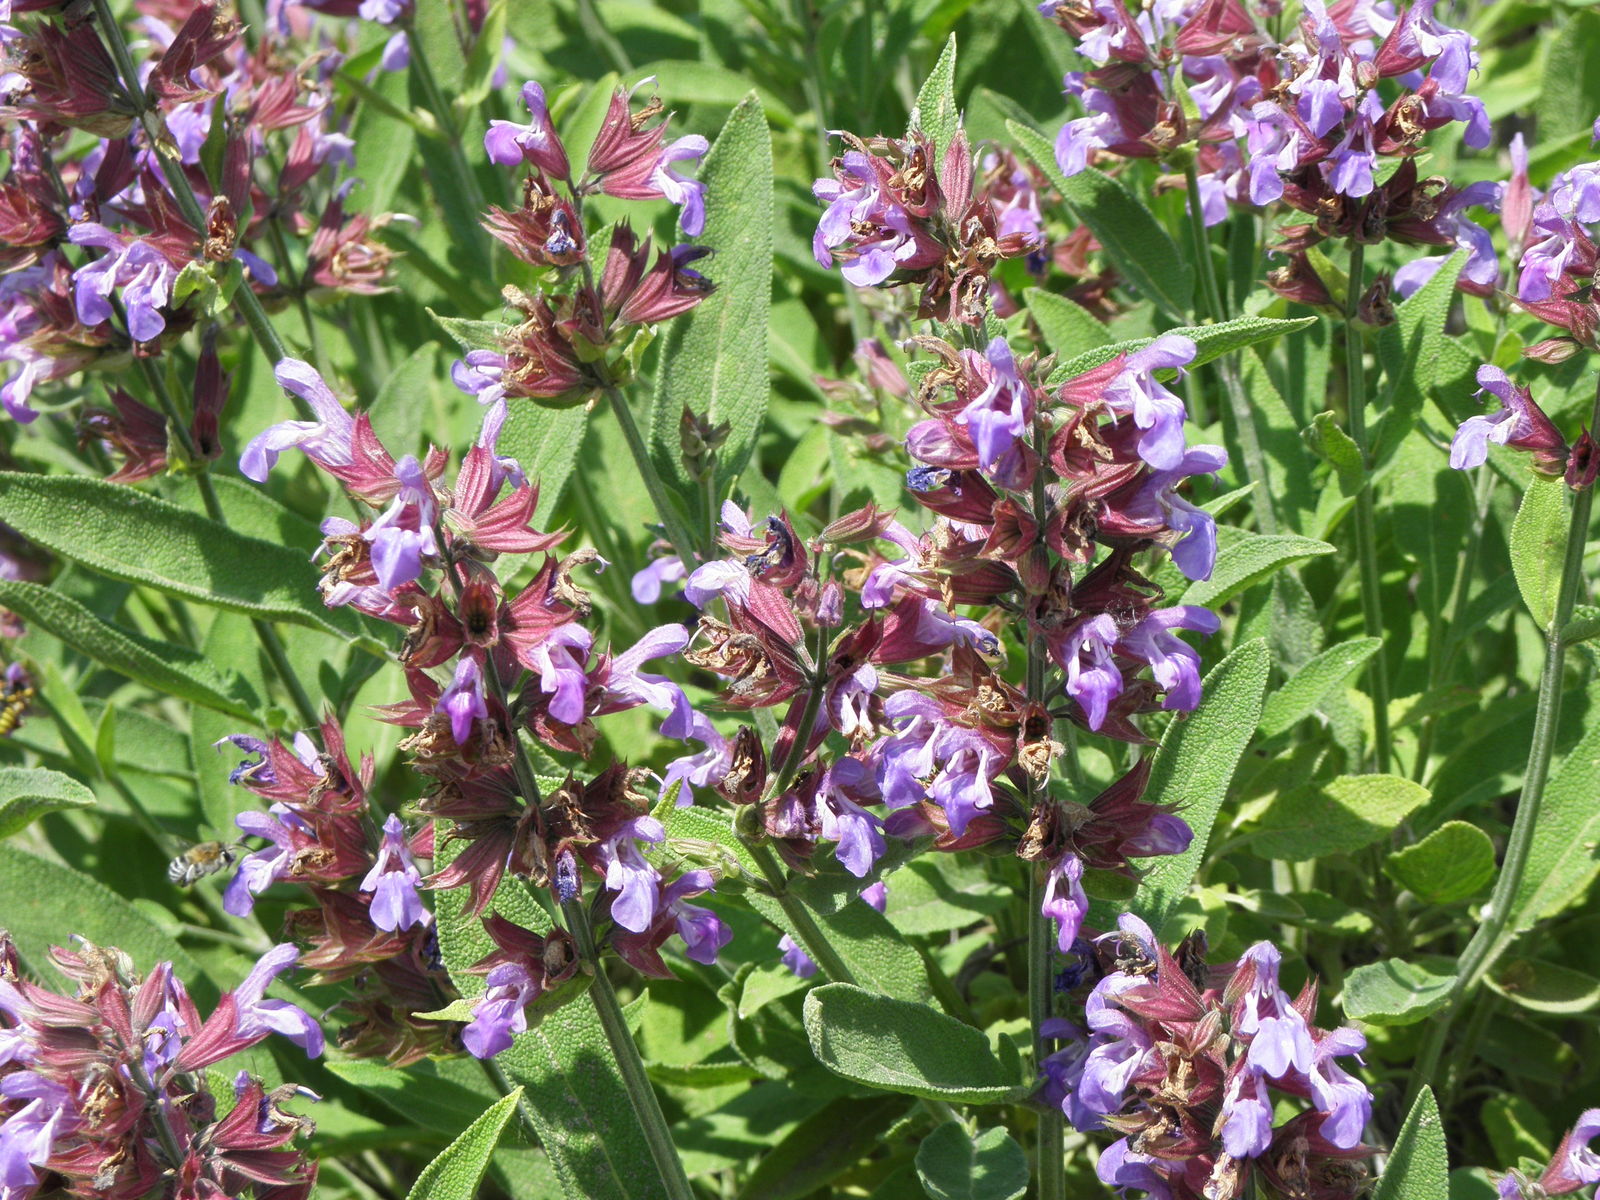 Purplish-blue flowers and oblong, green leaves of garden sage